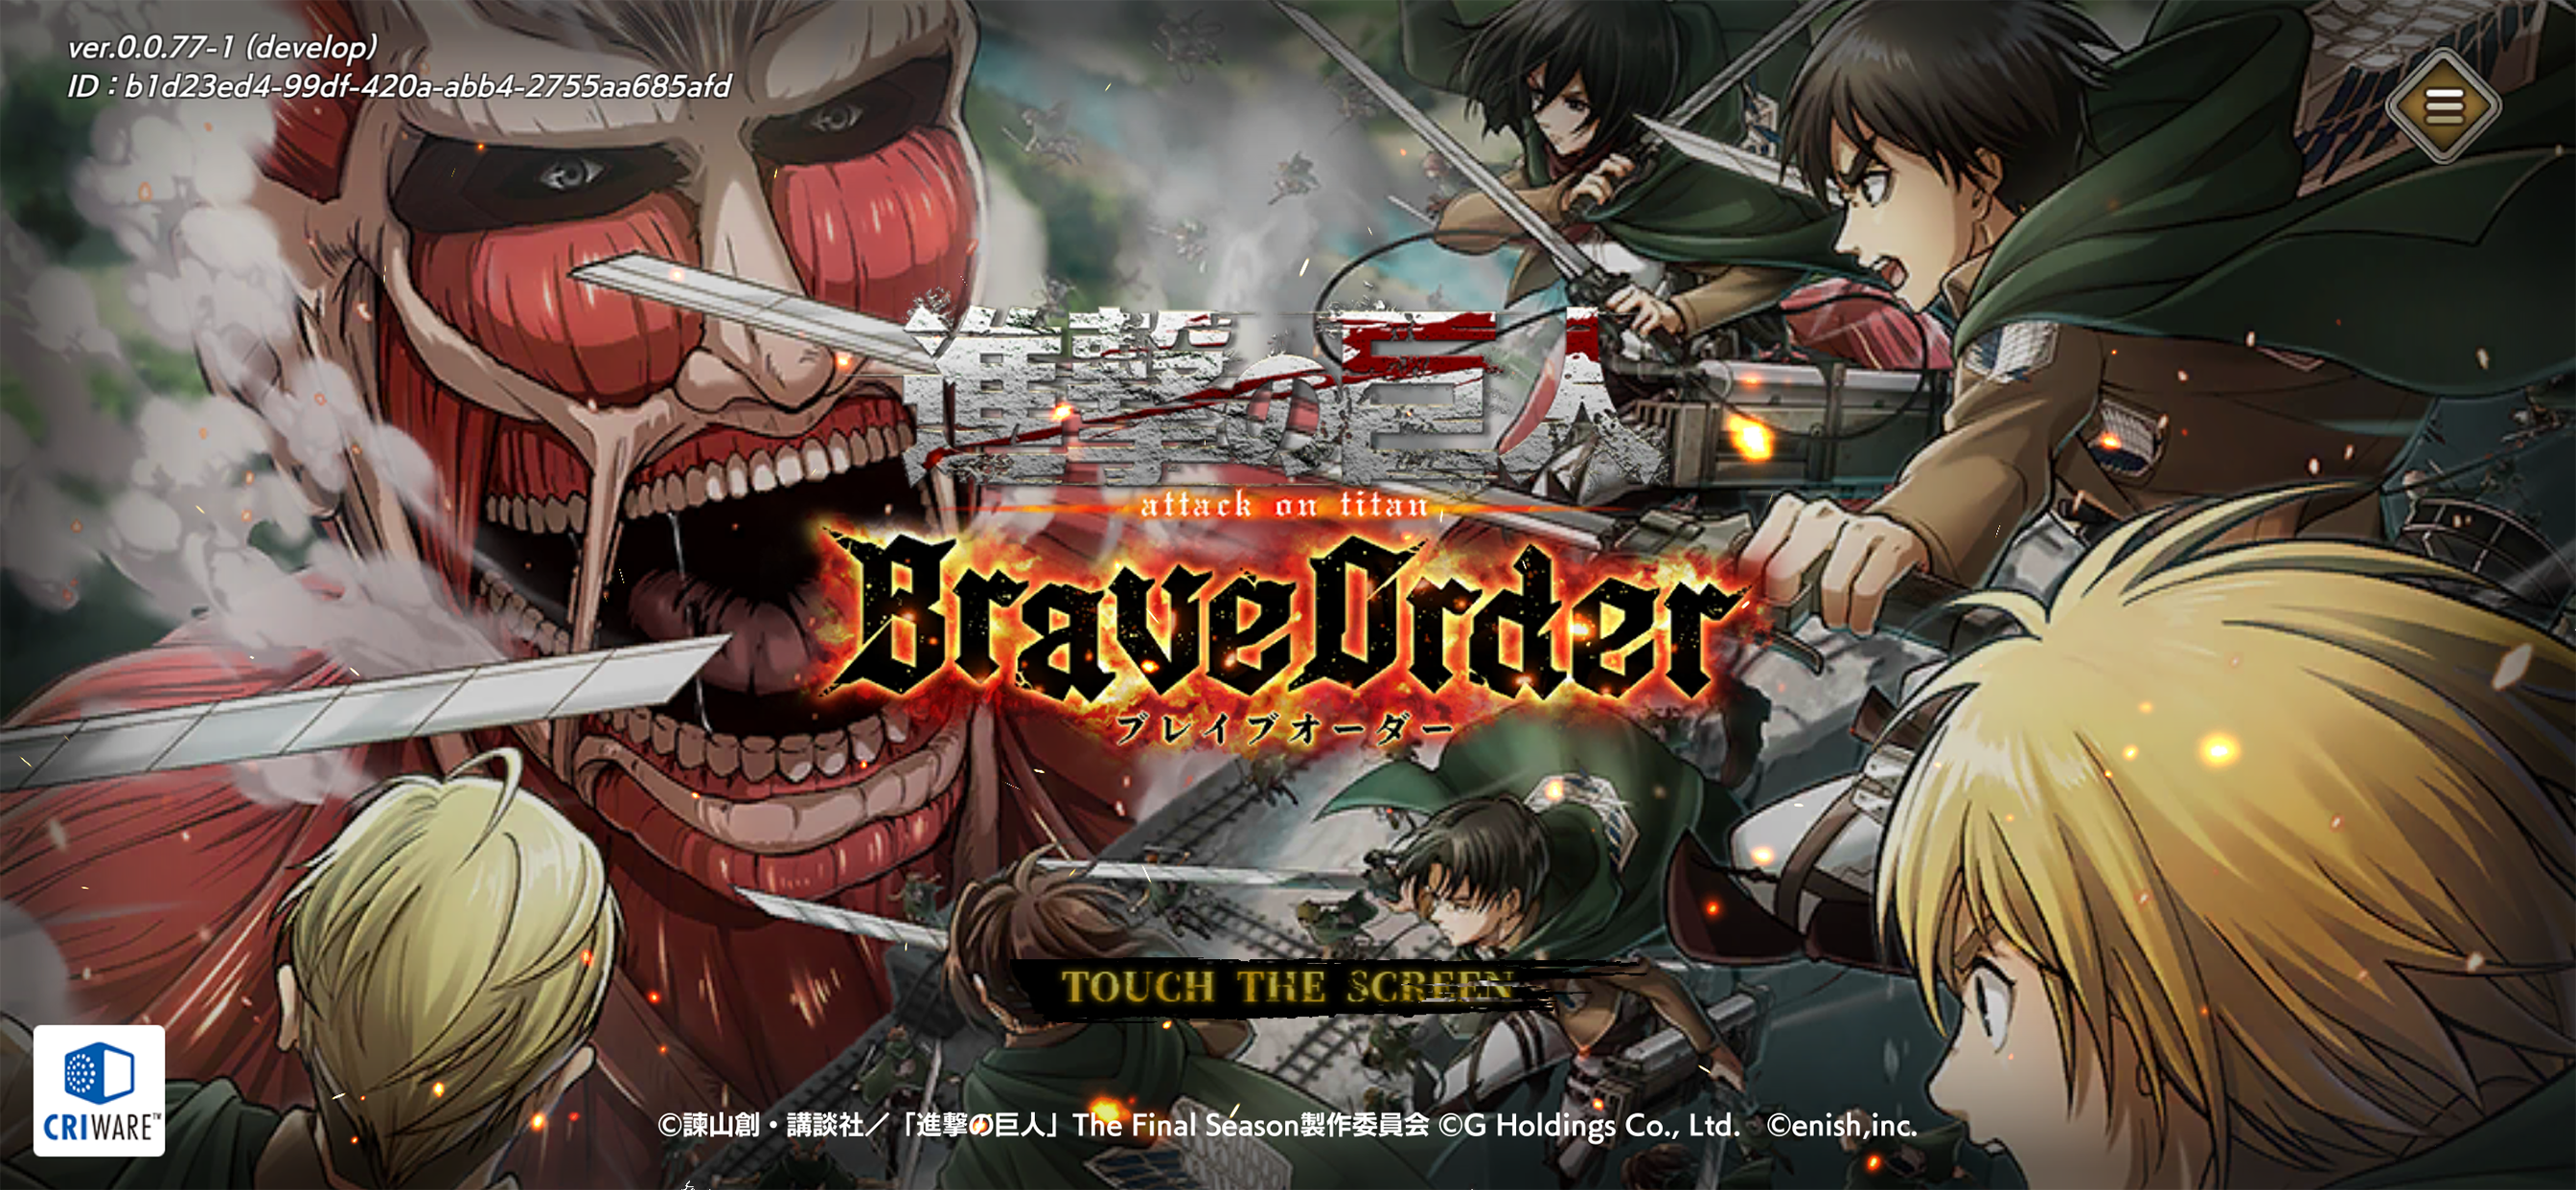 play attack on titan game online